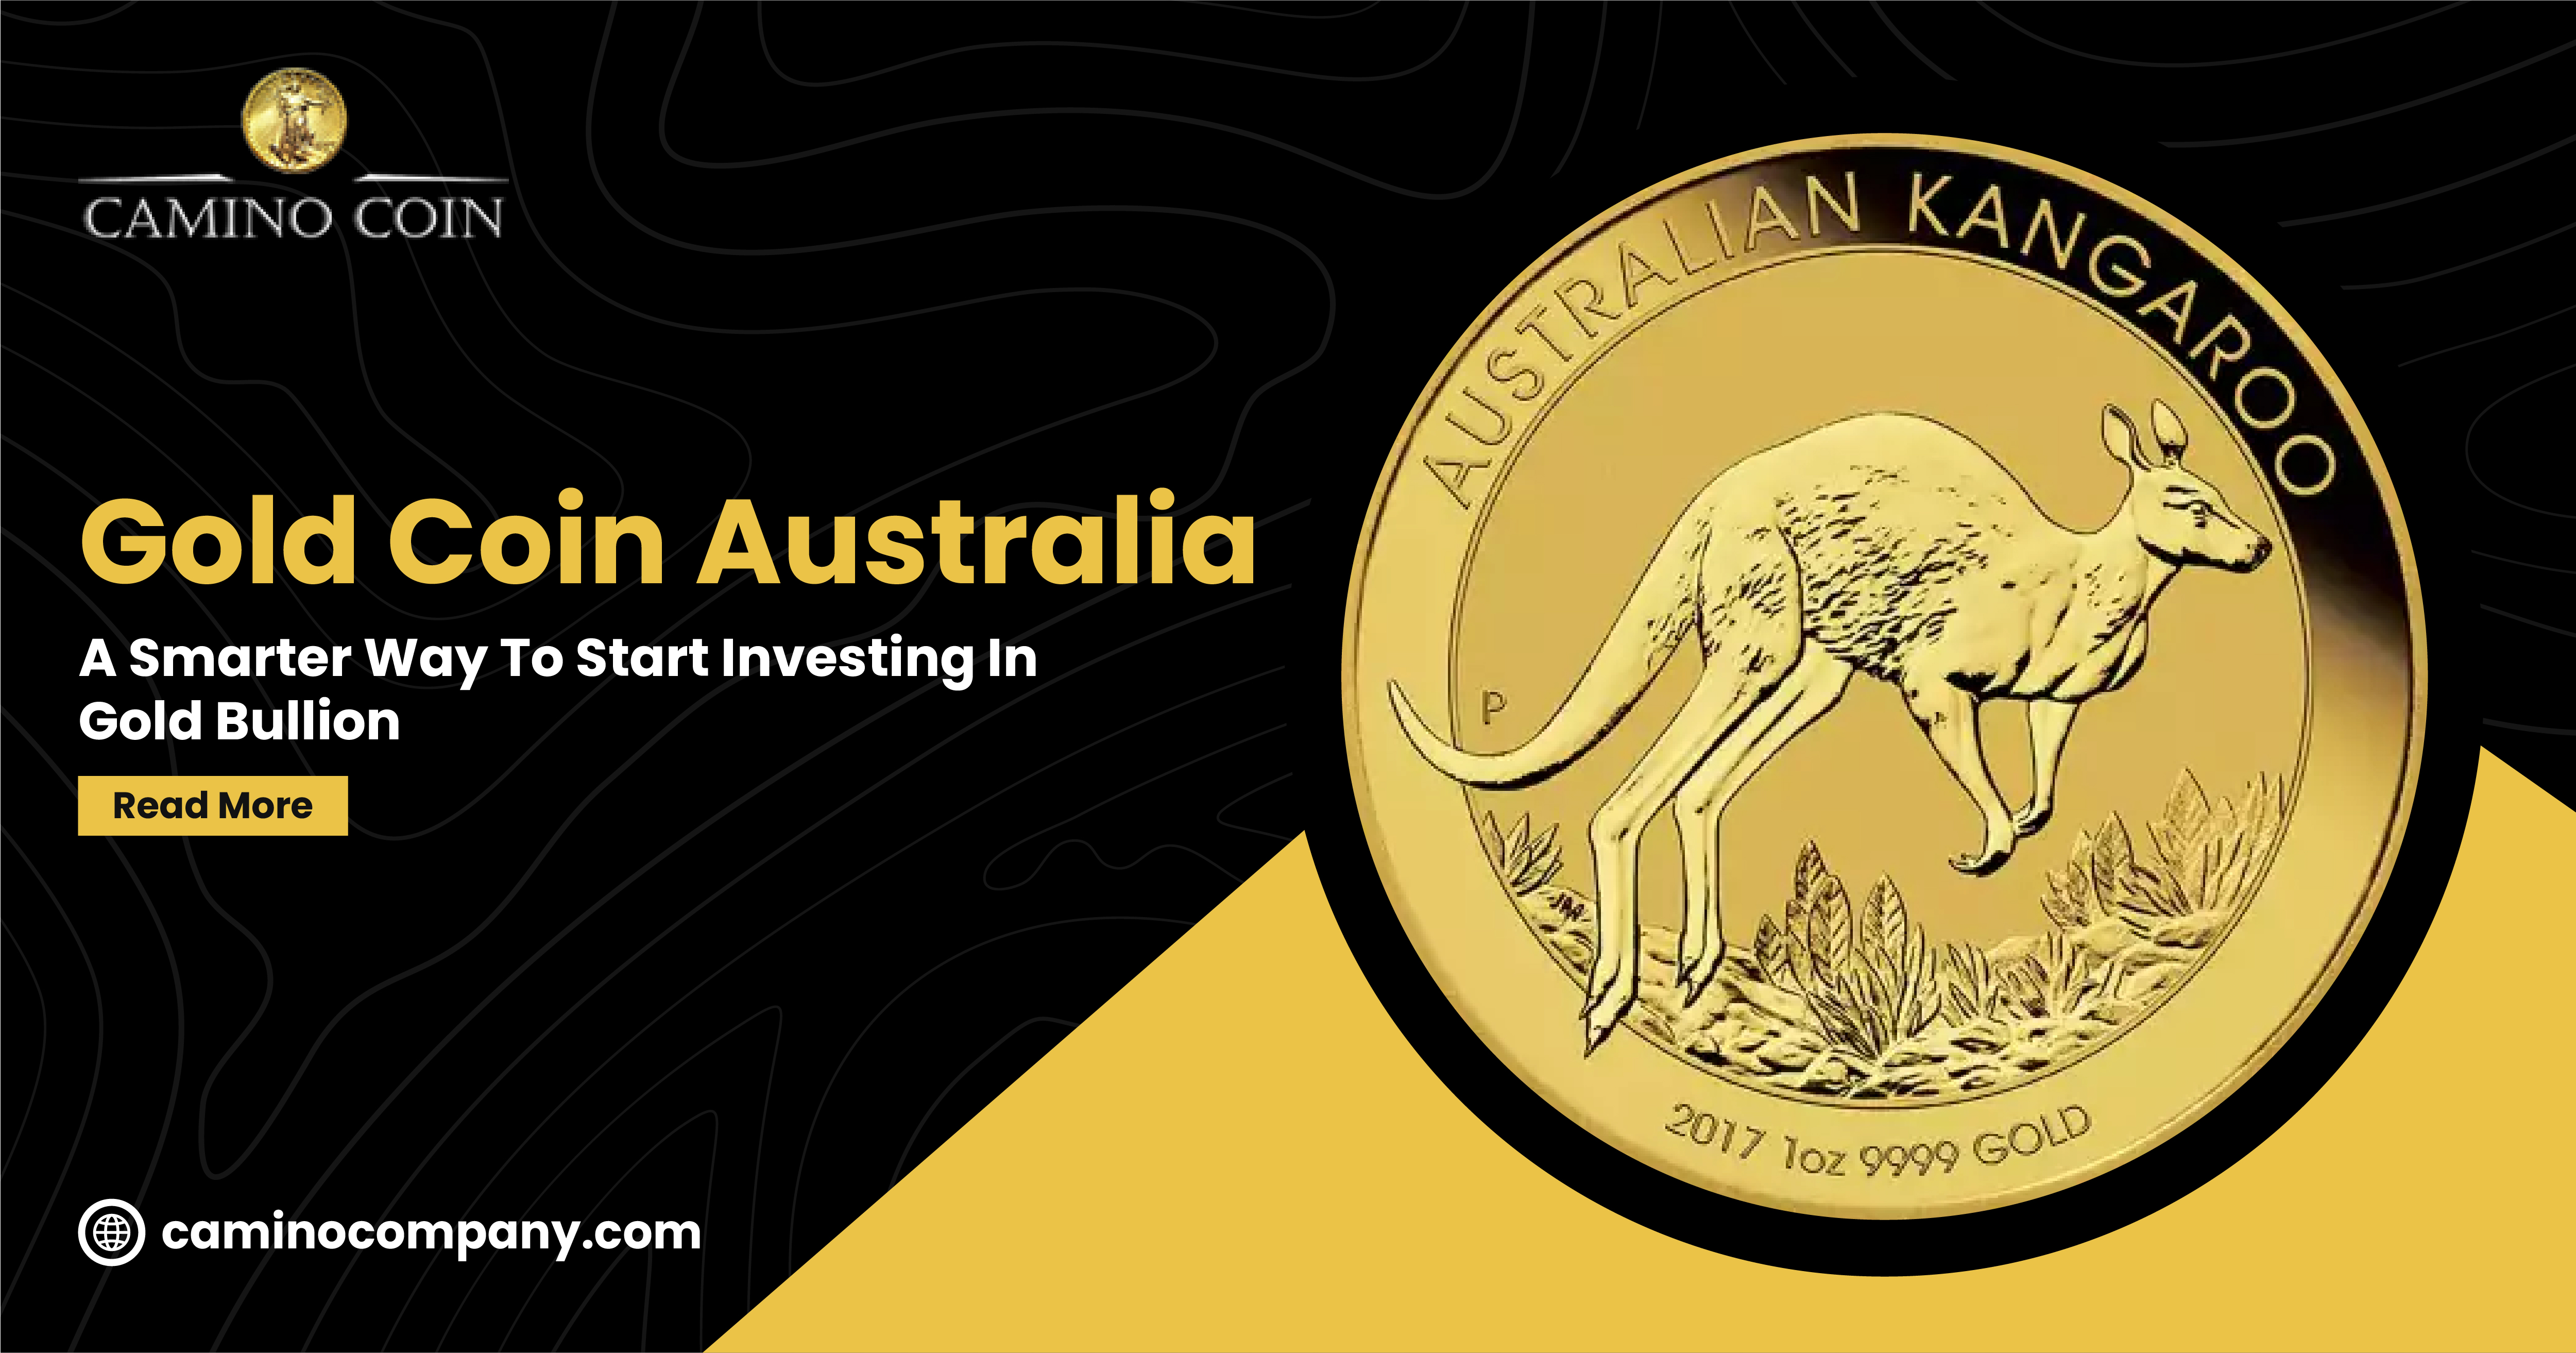 Gold Coin Australia: A Smarter Way To Start Investing In Gold Bullion